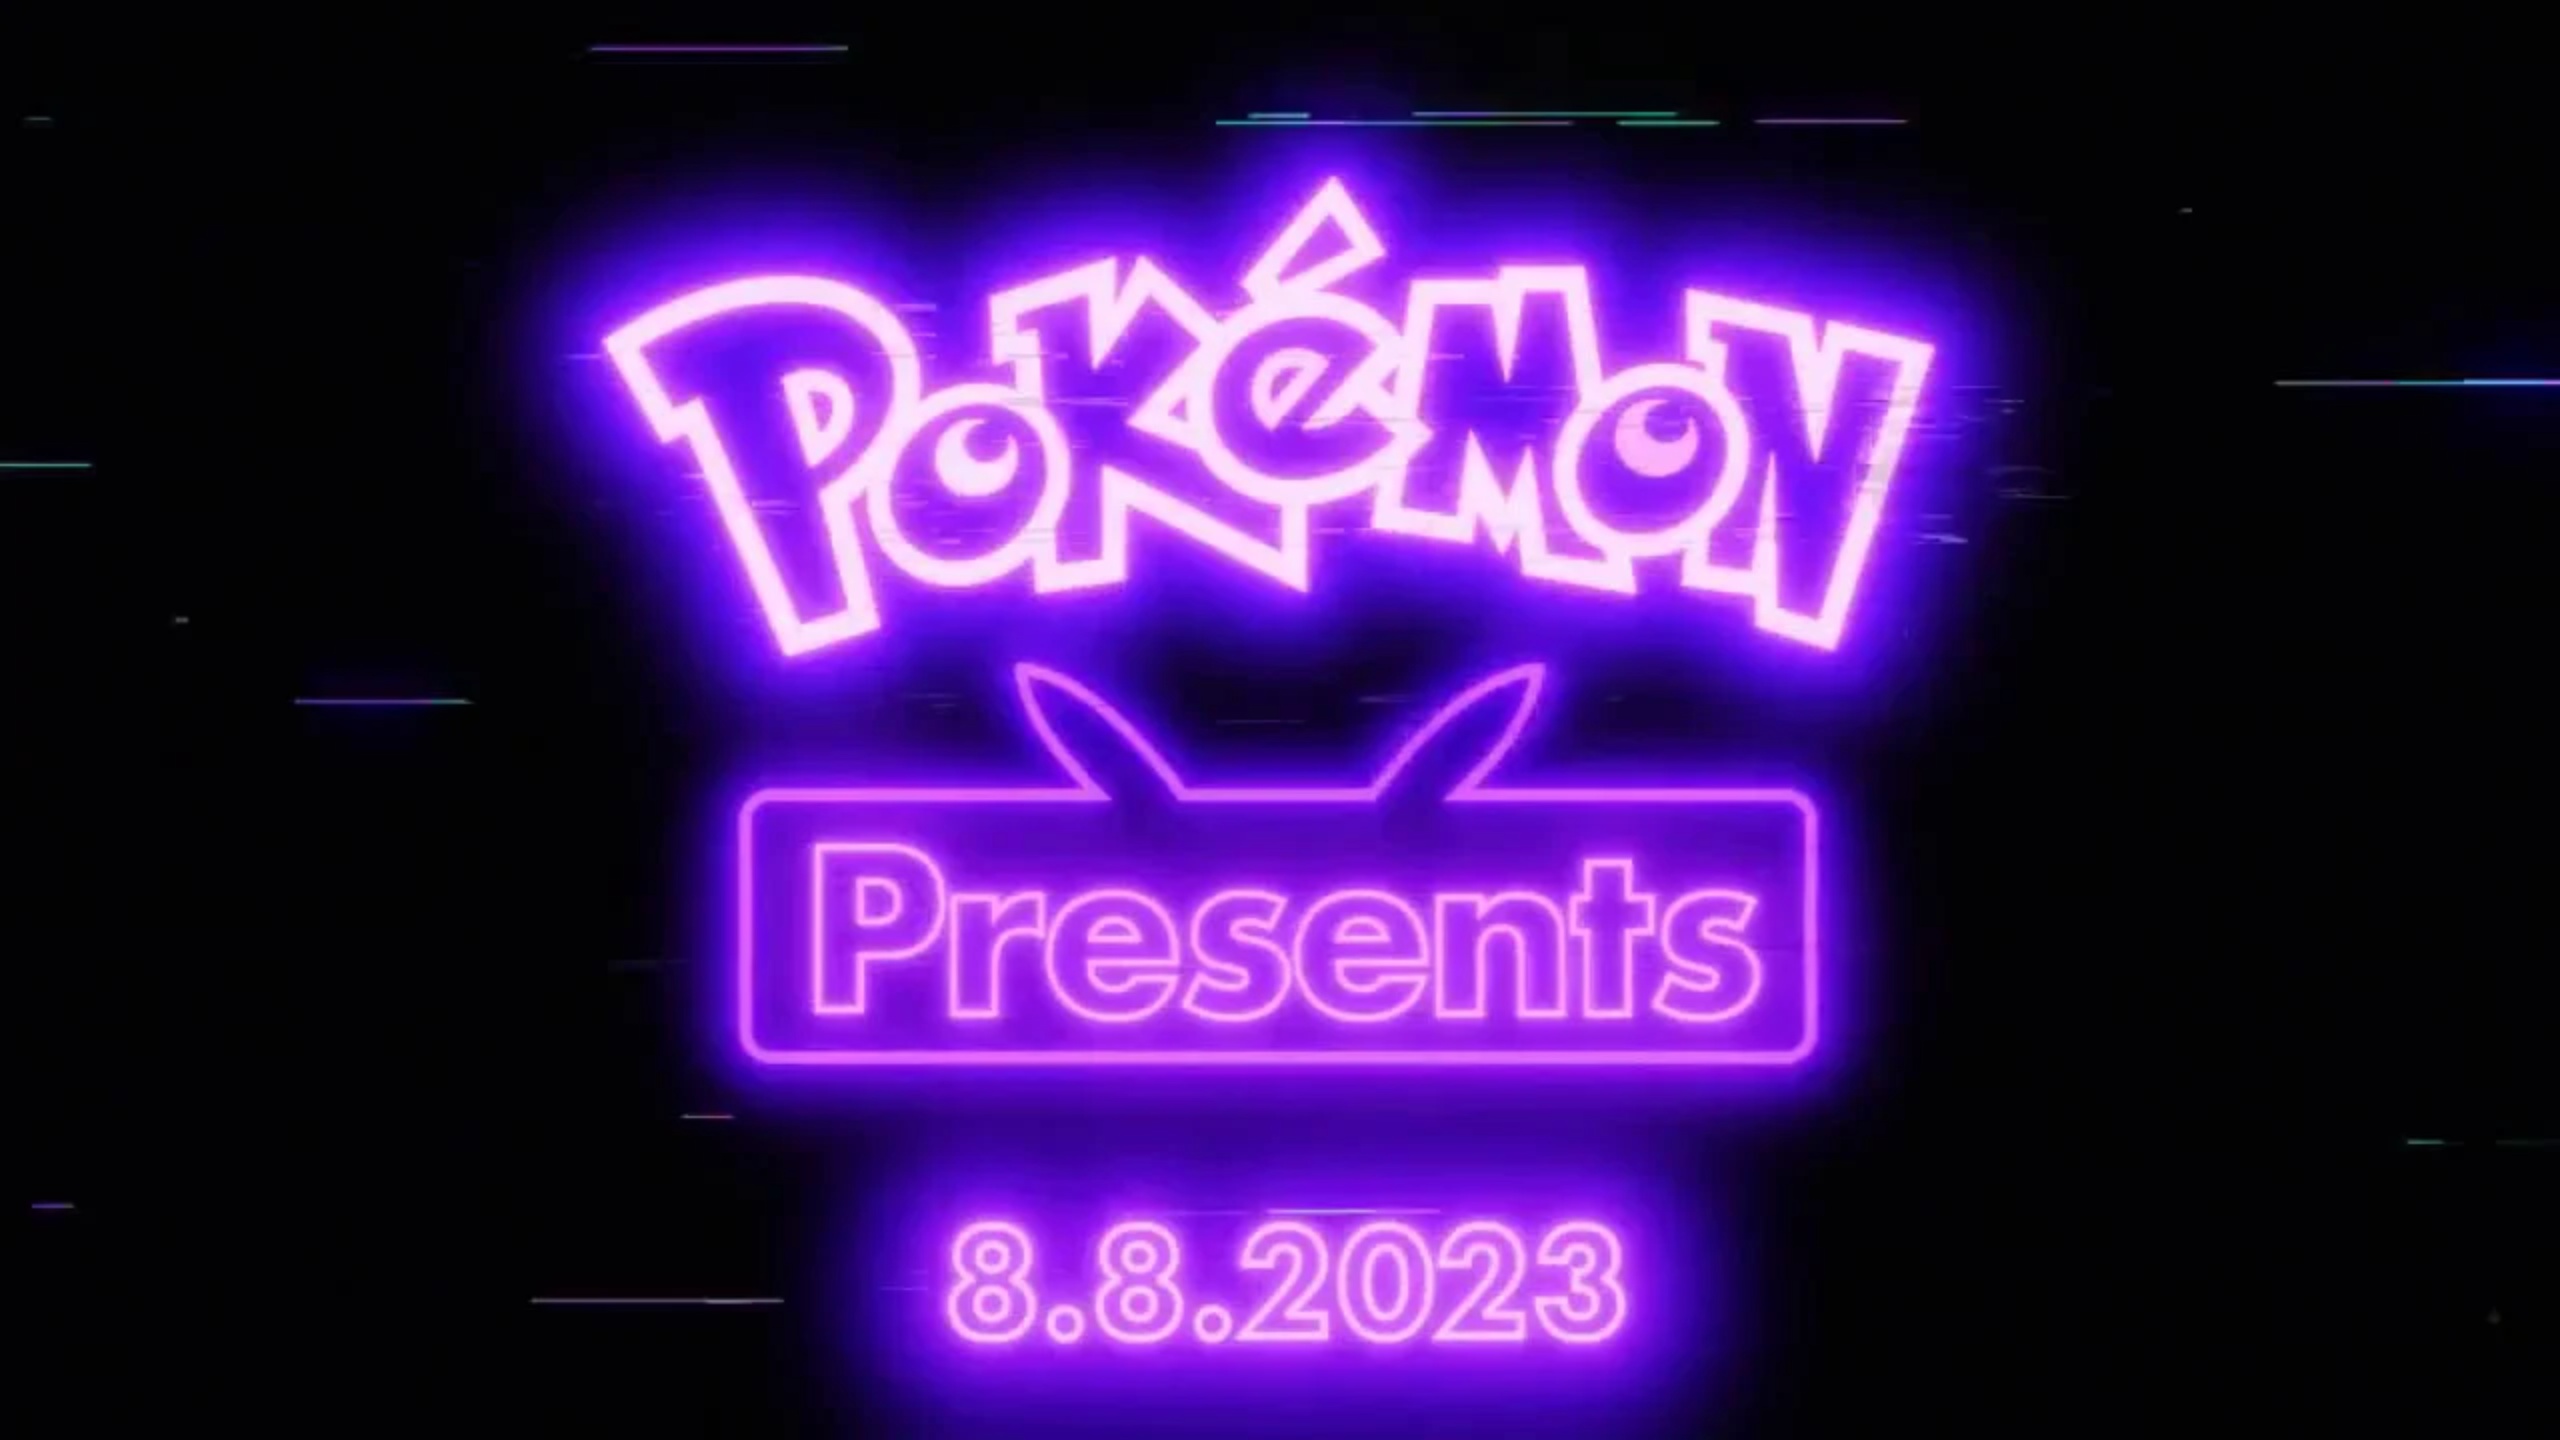 How to watch the next Pokémon Presents on August 8